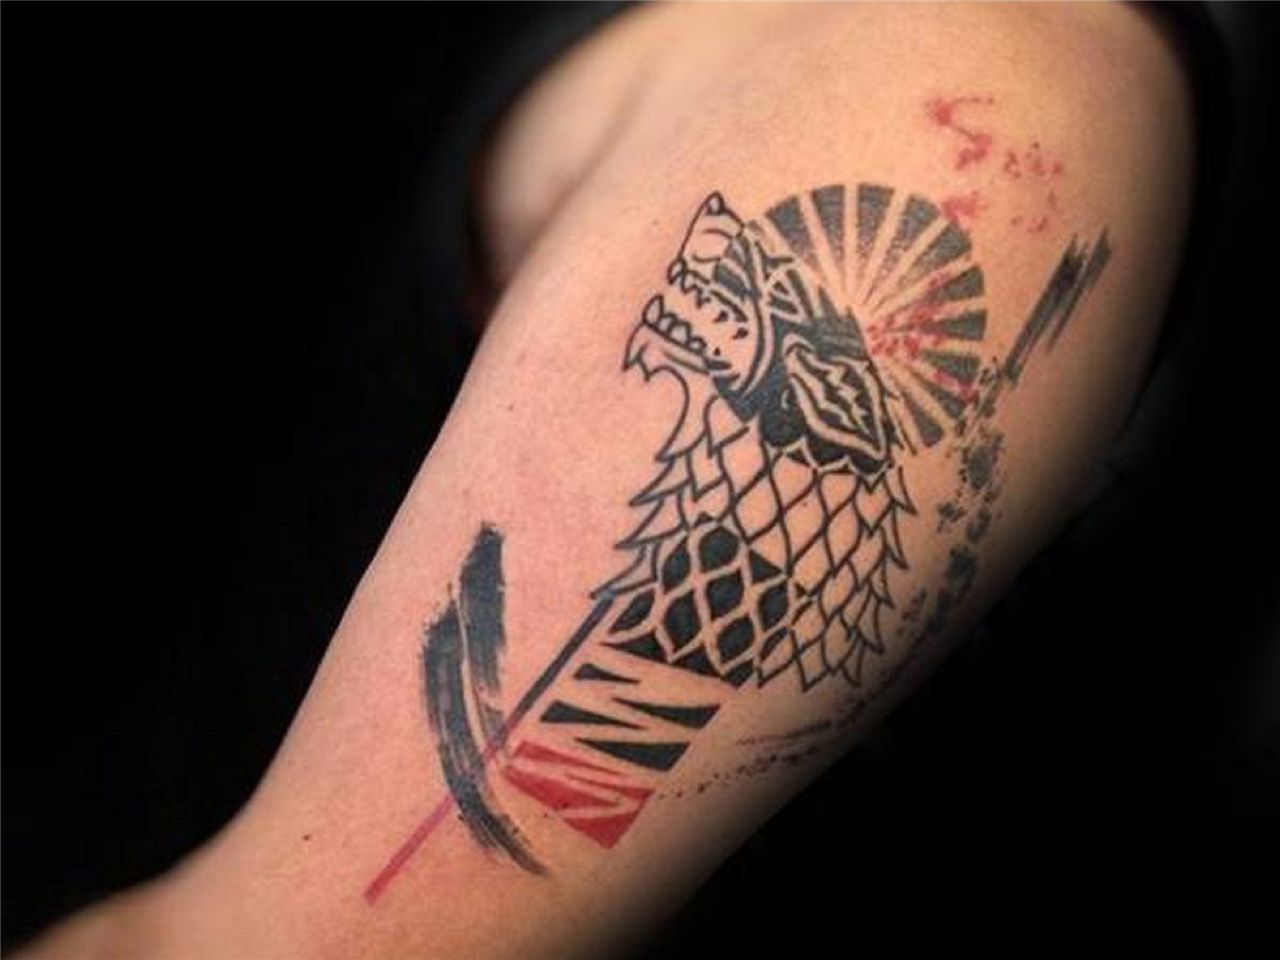 15 Game Of Thrones Tattoos Every GOT Fan Should Get To Mark Their Fandom